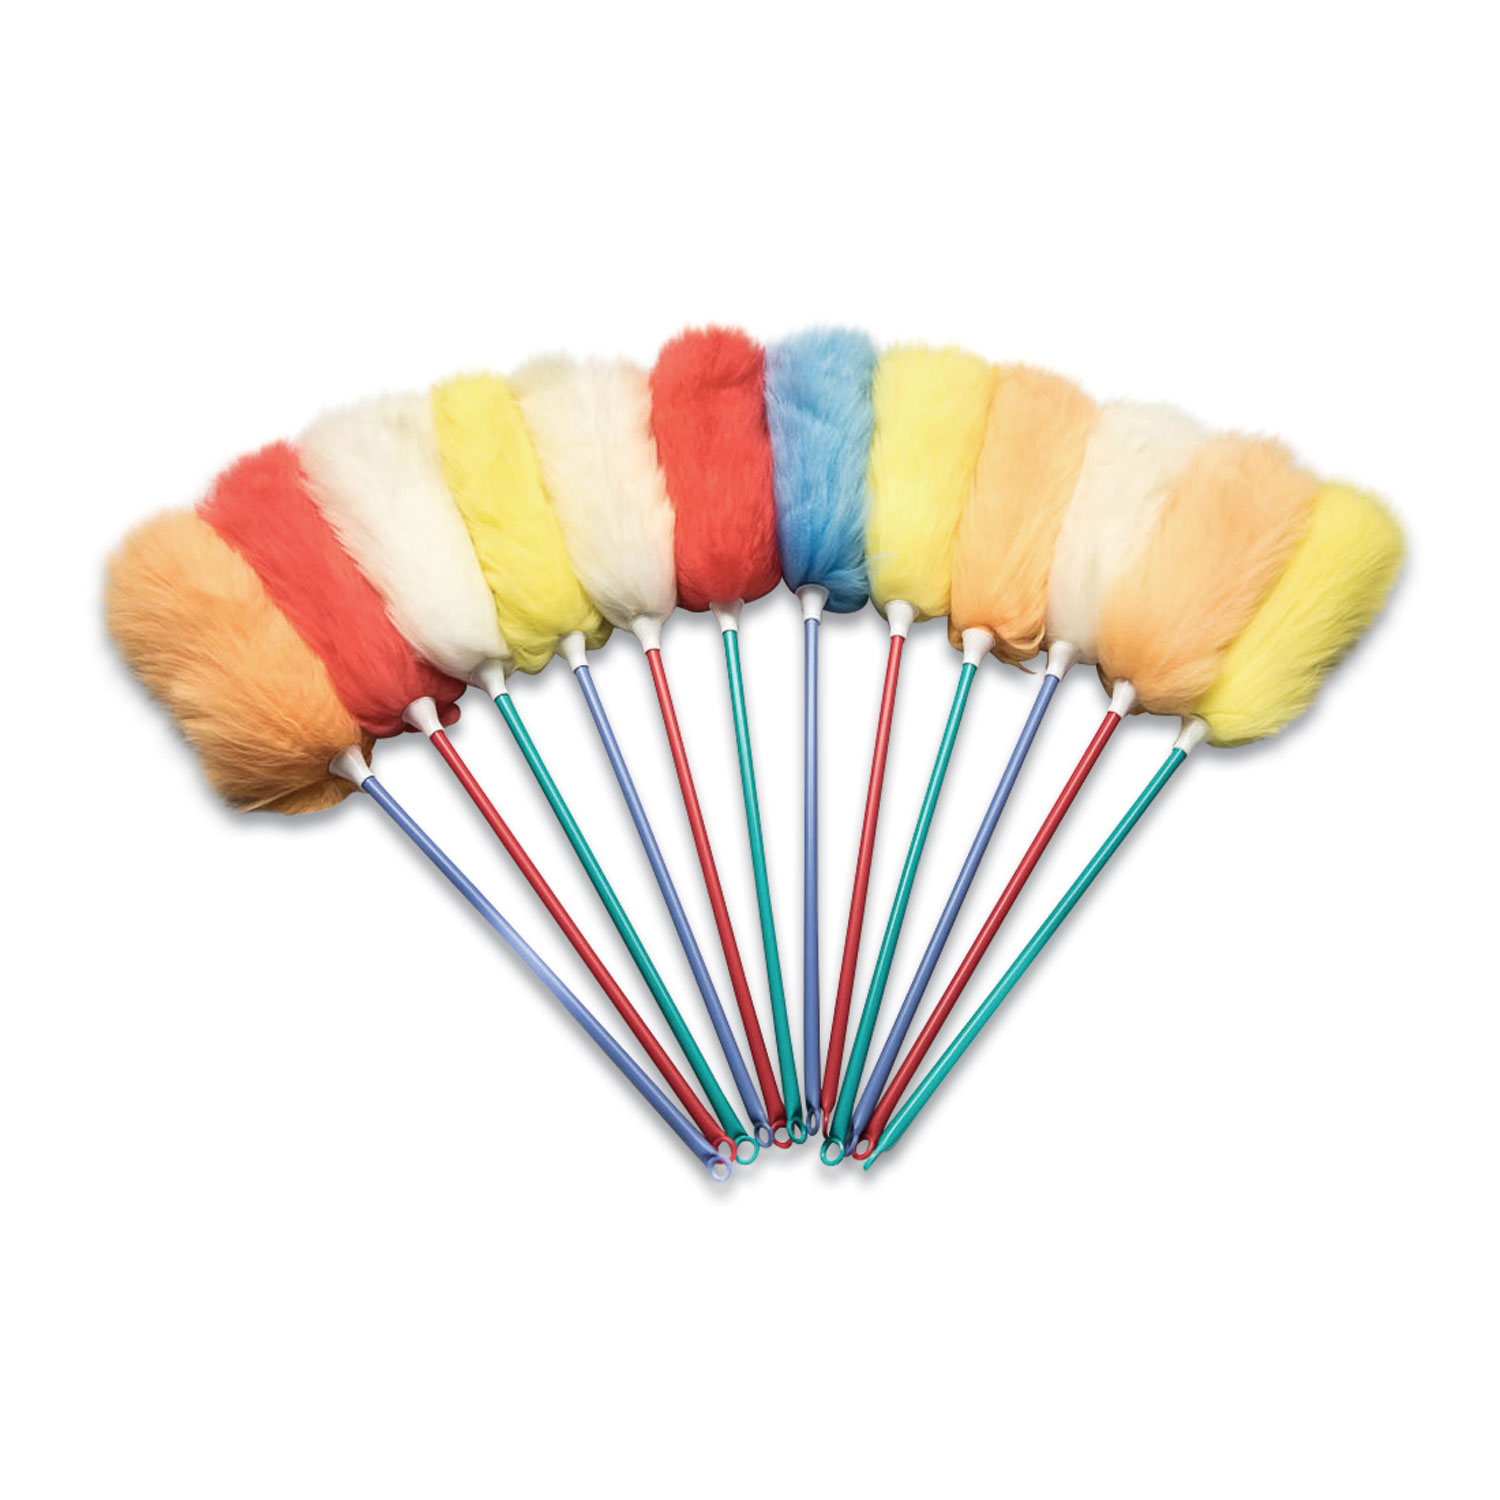 ODell® Lambswool Duster, 26 Overall Length, Assorted Wool/Handle Color